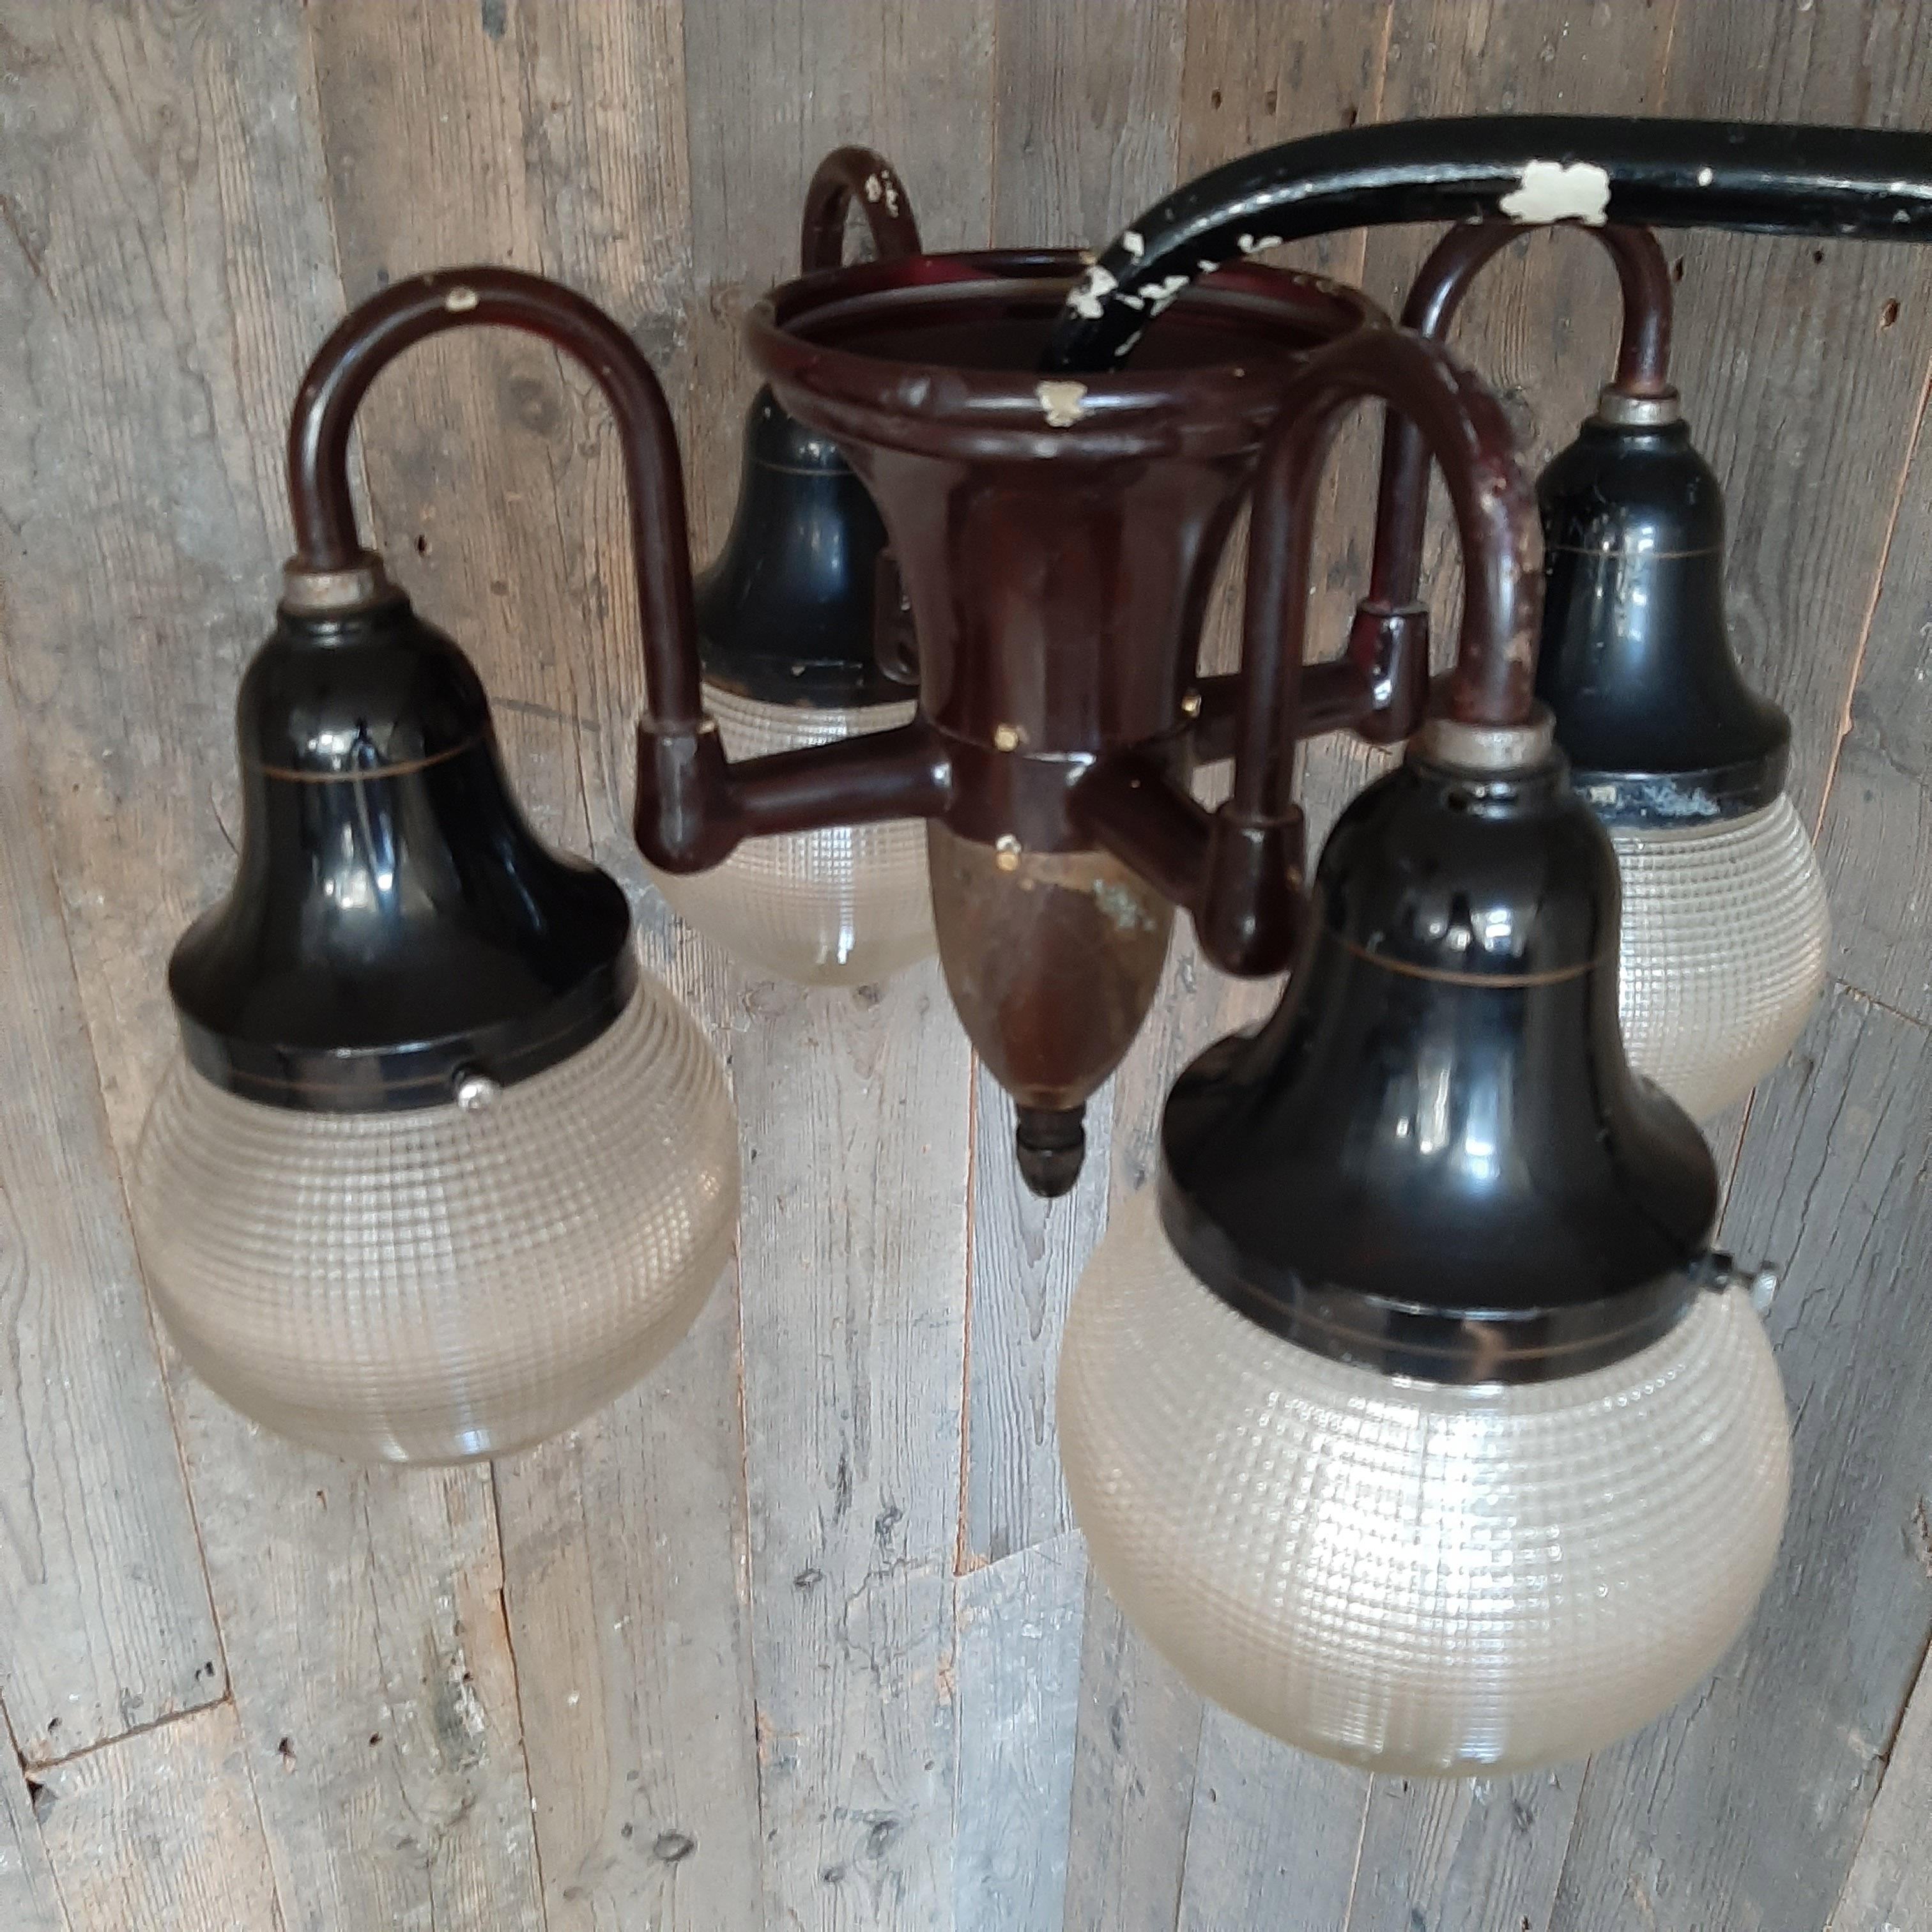 Vintage 1930s Holophane dentist overhead light. Industrial pendant lamp with a black steel body, four arms and four acorn shades. The lamp is fitted on a movable steel arm.

Measurements lamp: 35 x Ø 49 cm
Measurements arm: 35 x 60 cm.